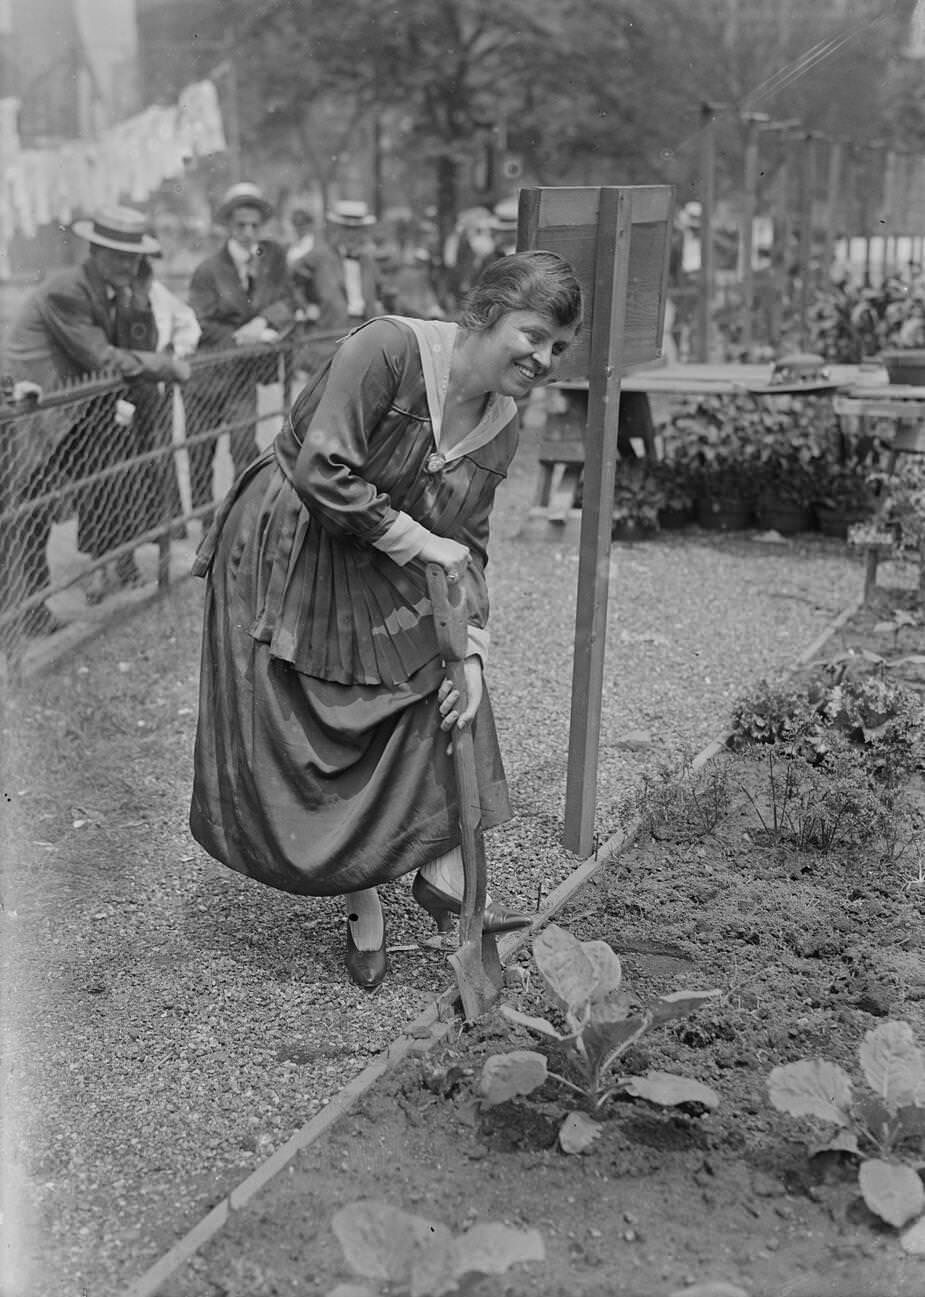 Soprano Opera Singer Mabel Garrison Siemonn, Digging A Spade Into The Ground At A Demonstration Garden Next To The Uss Recruit, 1917.